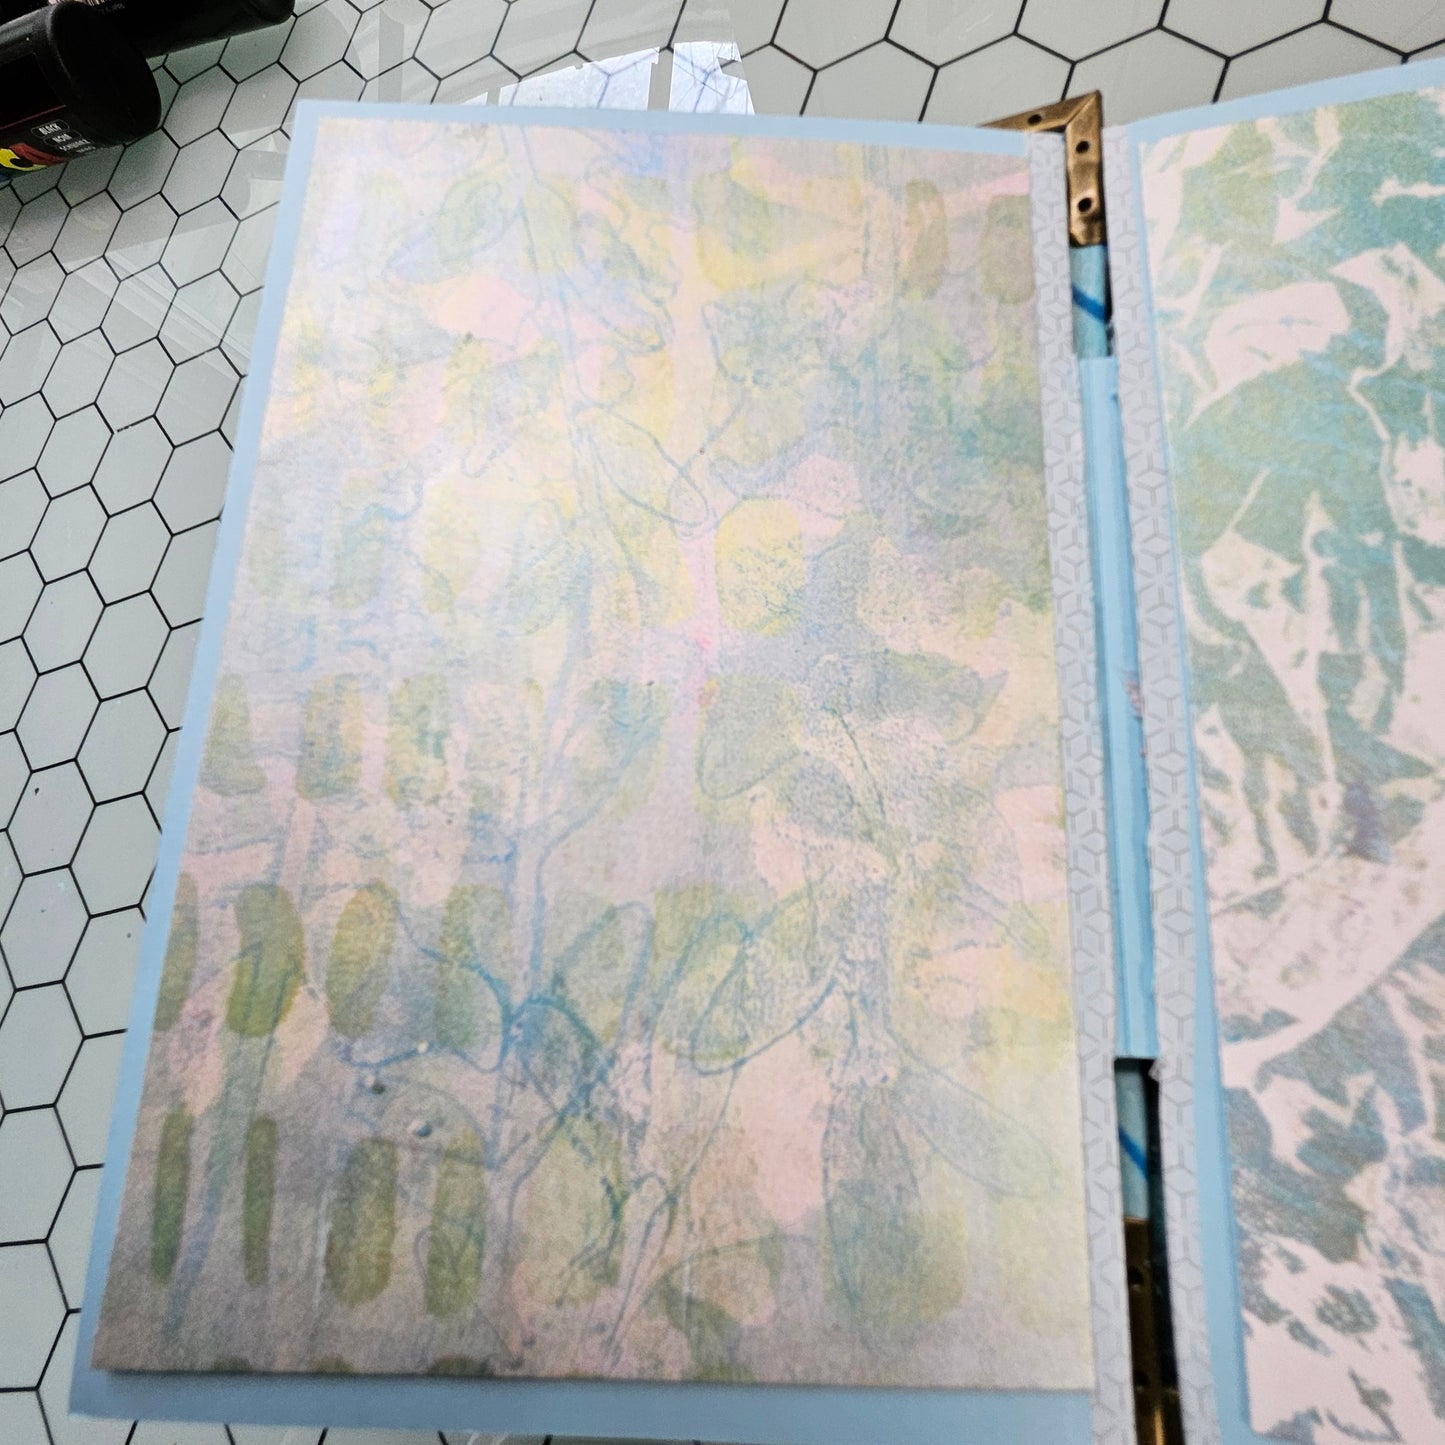 Hand-Painted Journal 5.5" x 7" - Multi-Media Painted Pages, Accordion Binding, Magnetic Closure